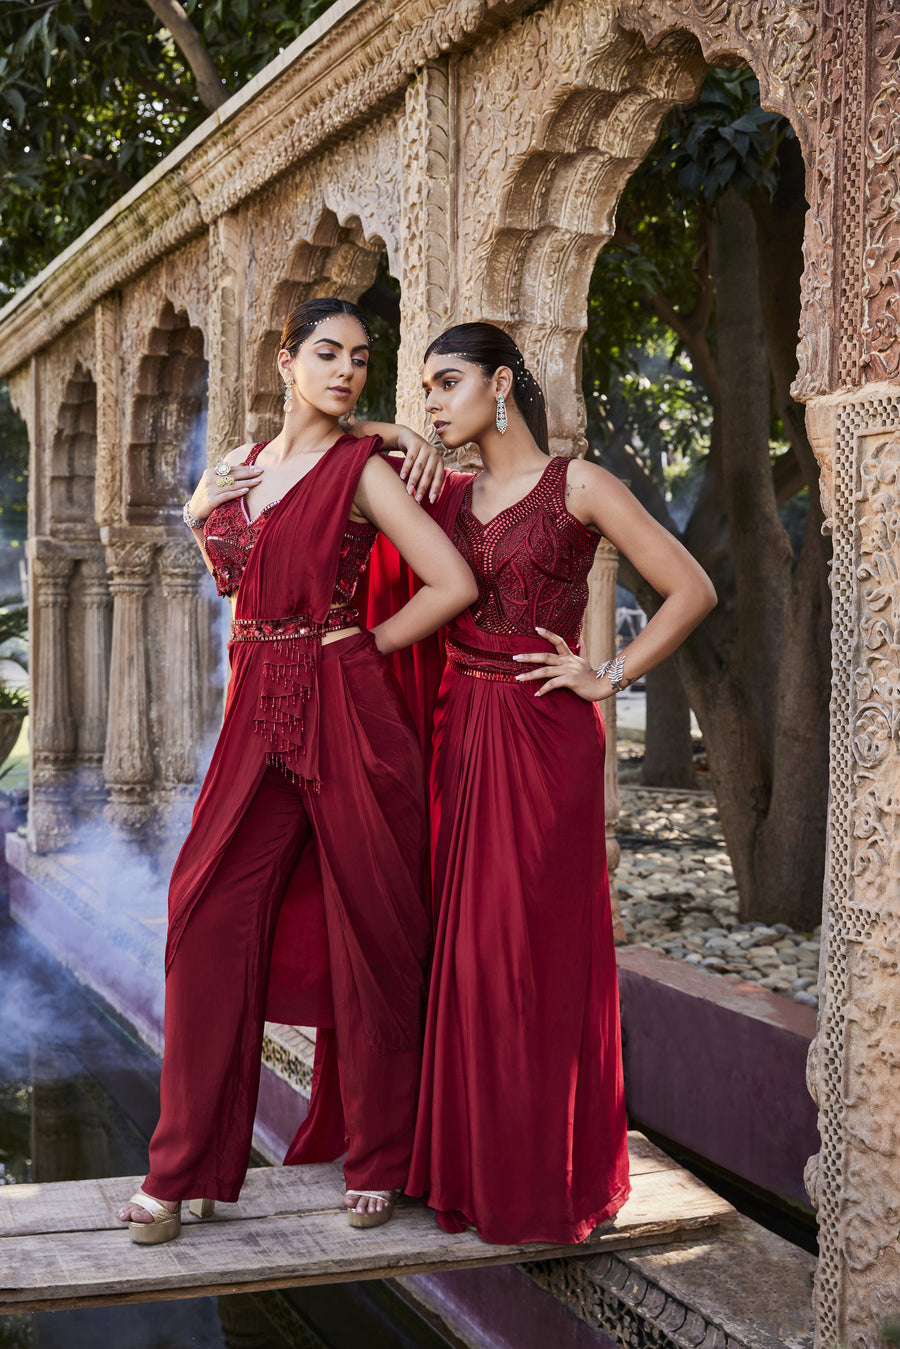 Red Gown With Sari Drape And An Embroidered Belt.